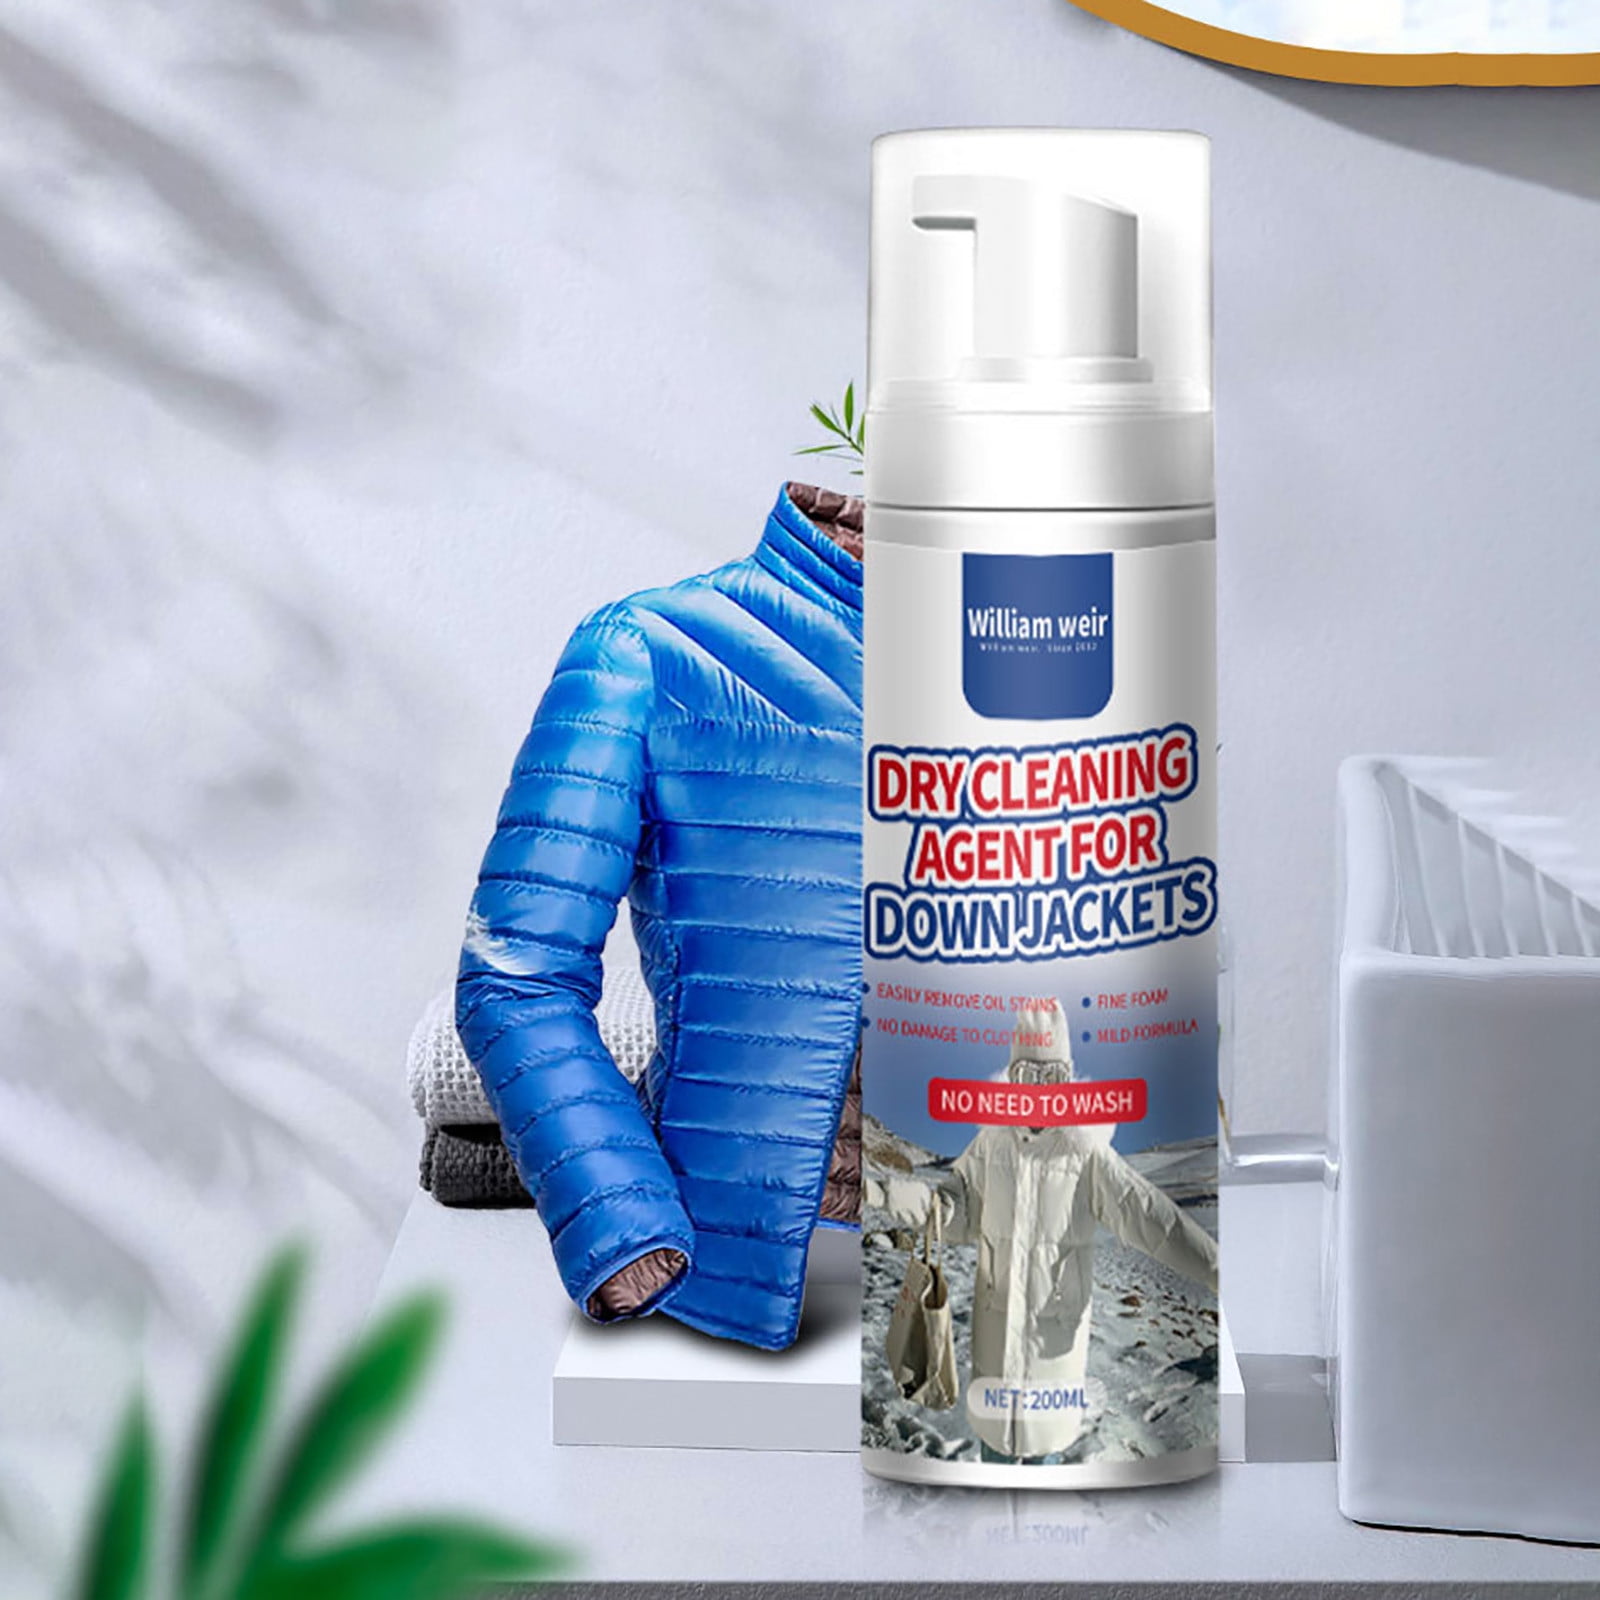 Household down coat dry cleaner to remove stains down coat cleaner to  remove oil stains down coat cleaner dry cleaner